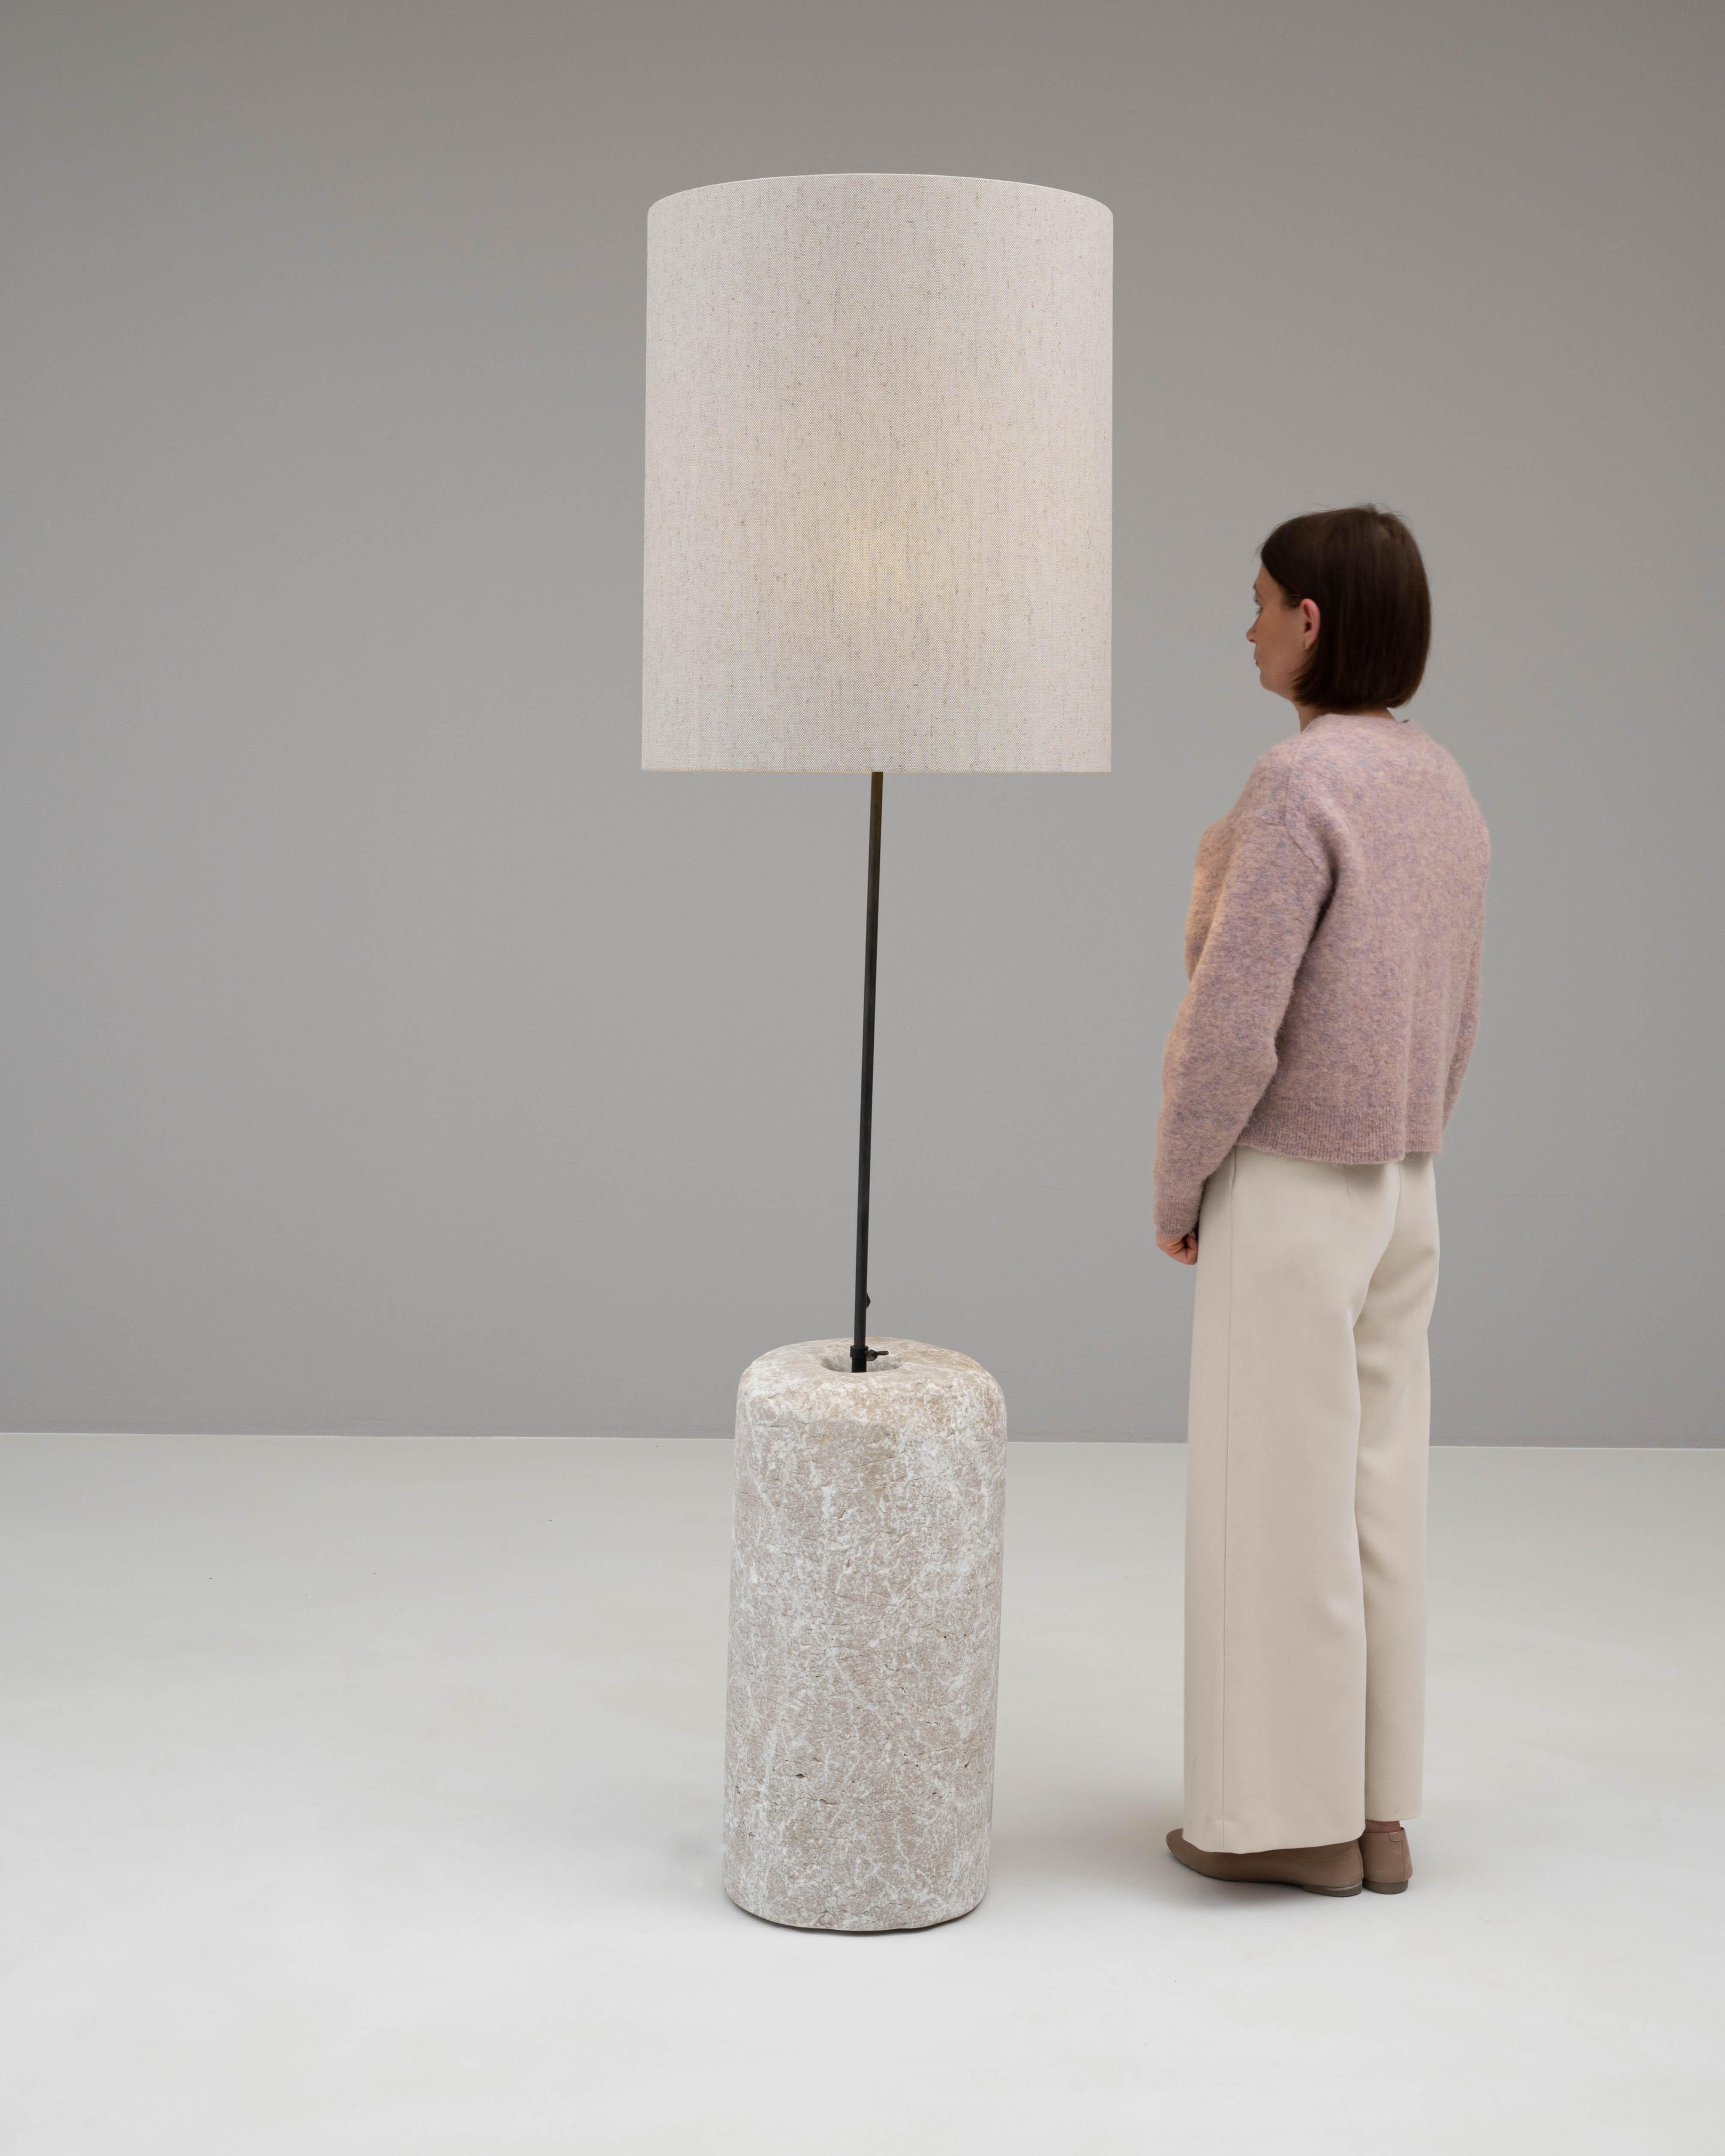 This 1900s European floor lamp beautifully marries the rugged texture of natural marble with the industrial sleekness of metal. The lamp's base, robust in form and rich with the organic patterns unique to marble, is a solid foundation that exudes